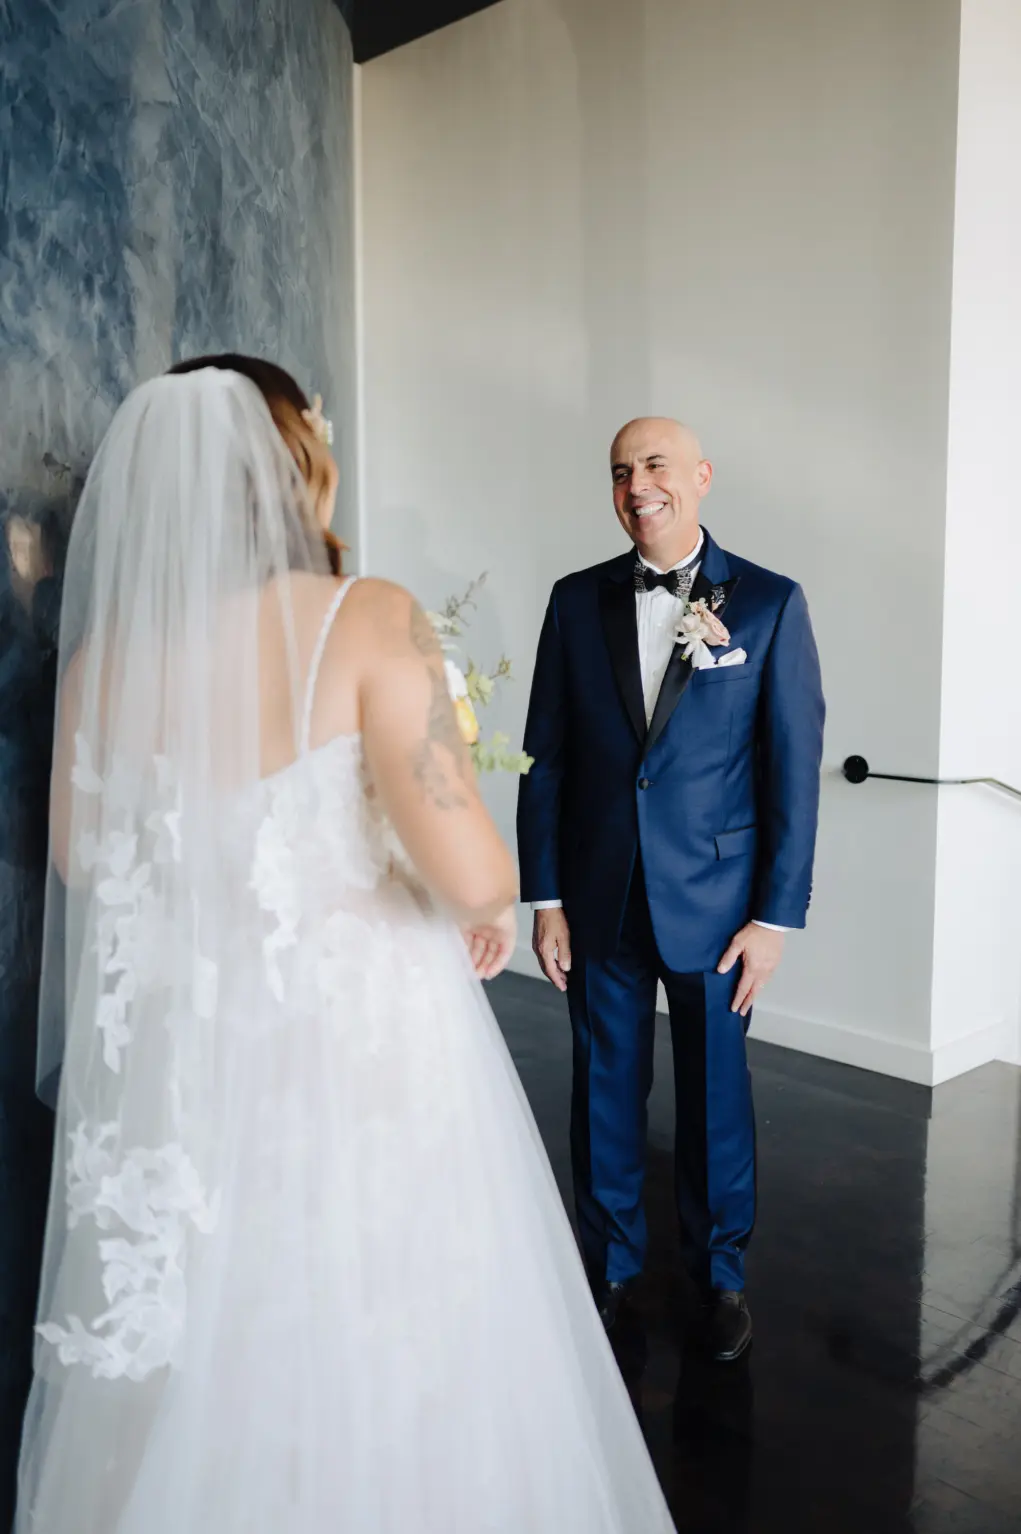 Bride and Father First Look Wedding Portrait | Tampa Wedding Photographer McNeile Photography